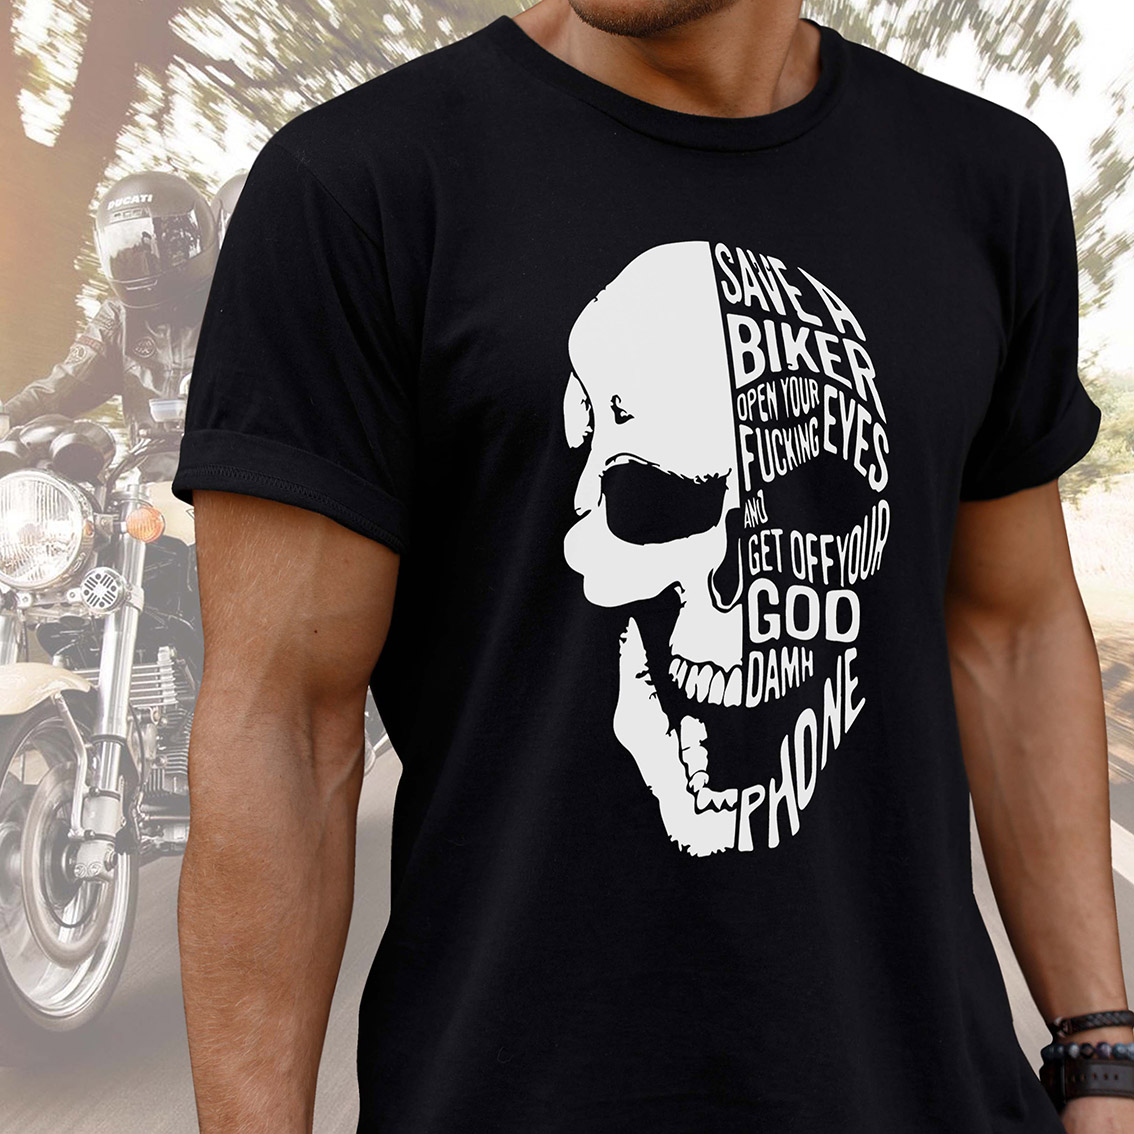 Camiseta Unissex Save a Biker Open Your Eyes Fucking And Get Off Your Goddamn Phone (Preta) - CD